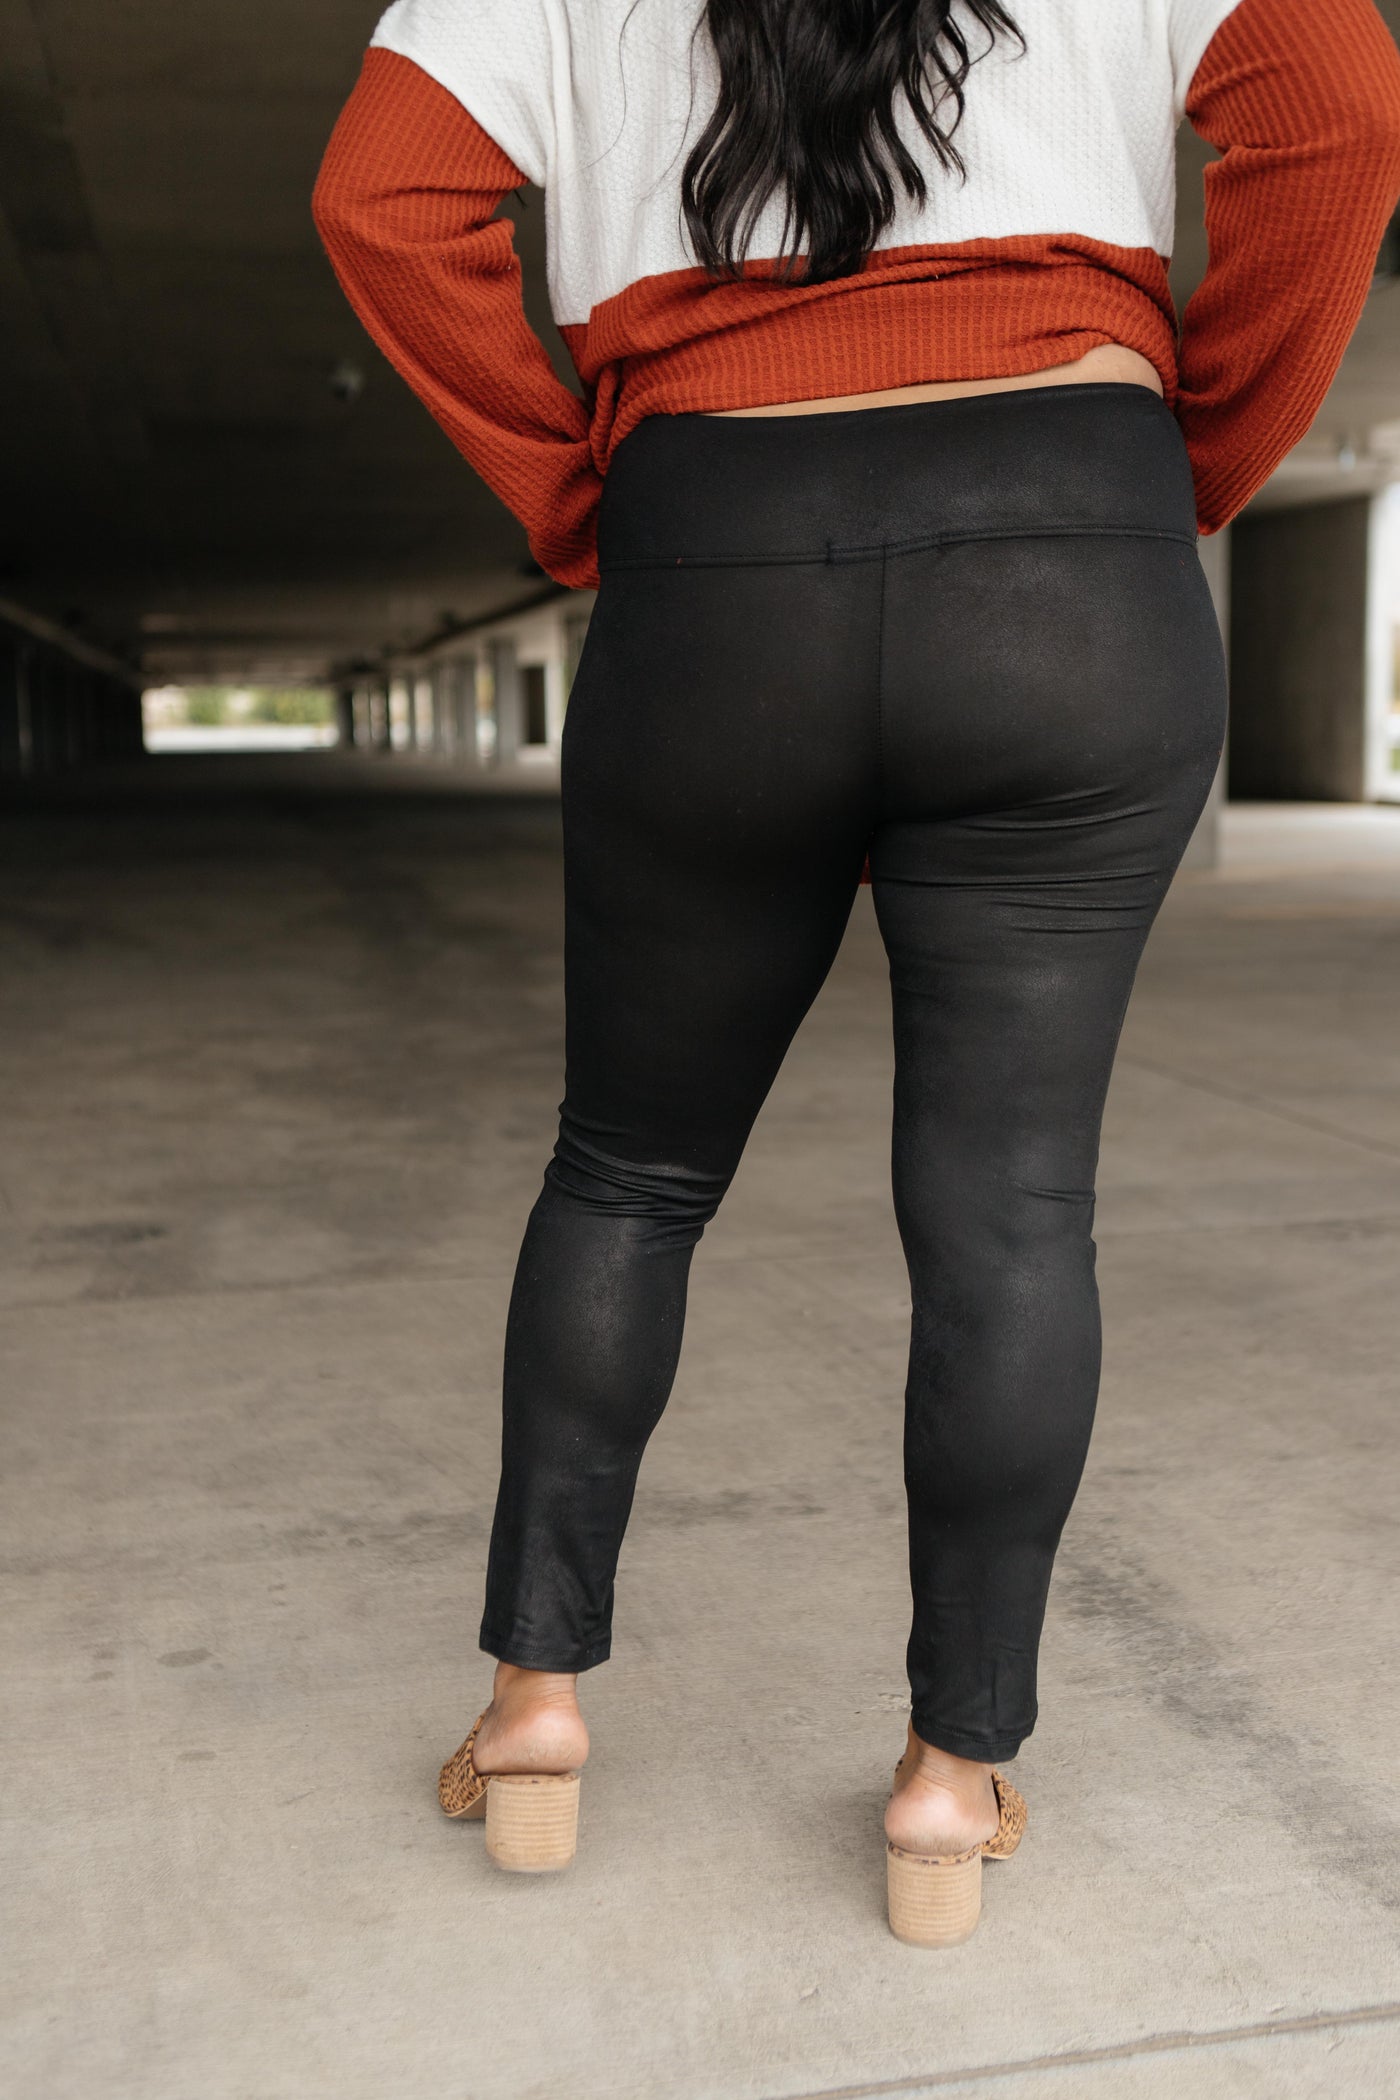 Leg Up Black Leggings-W Bottom-Graceful & Chic Boutique, Family Clothing Store in Waxahachie, Texas